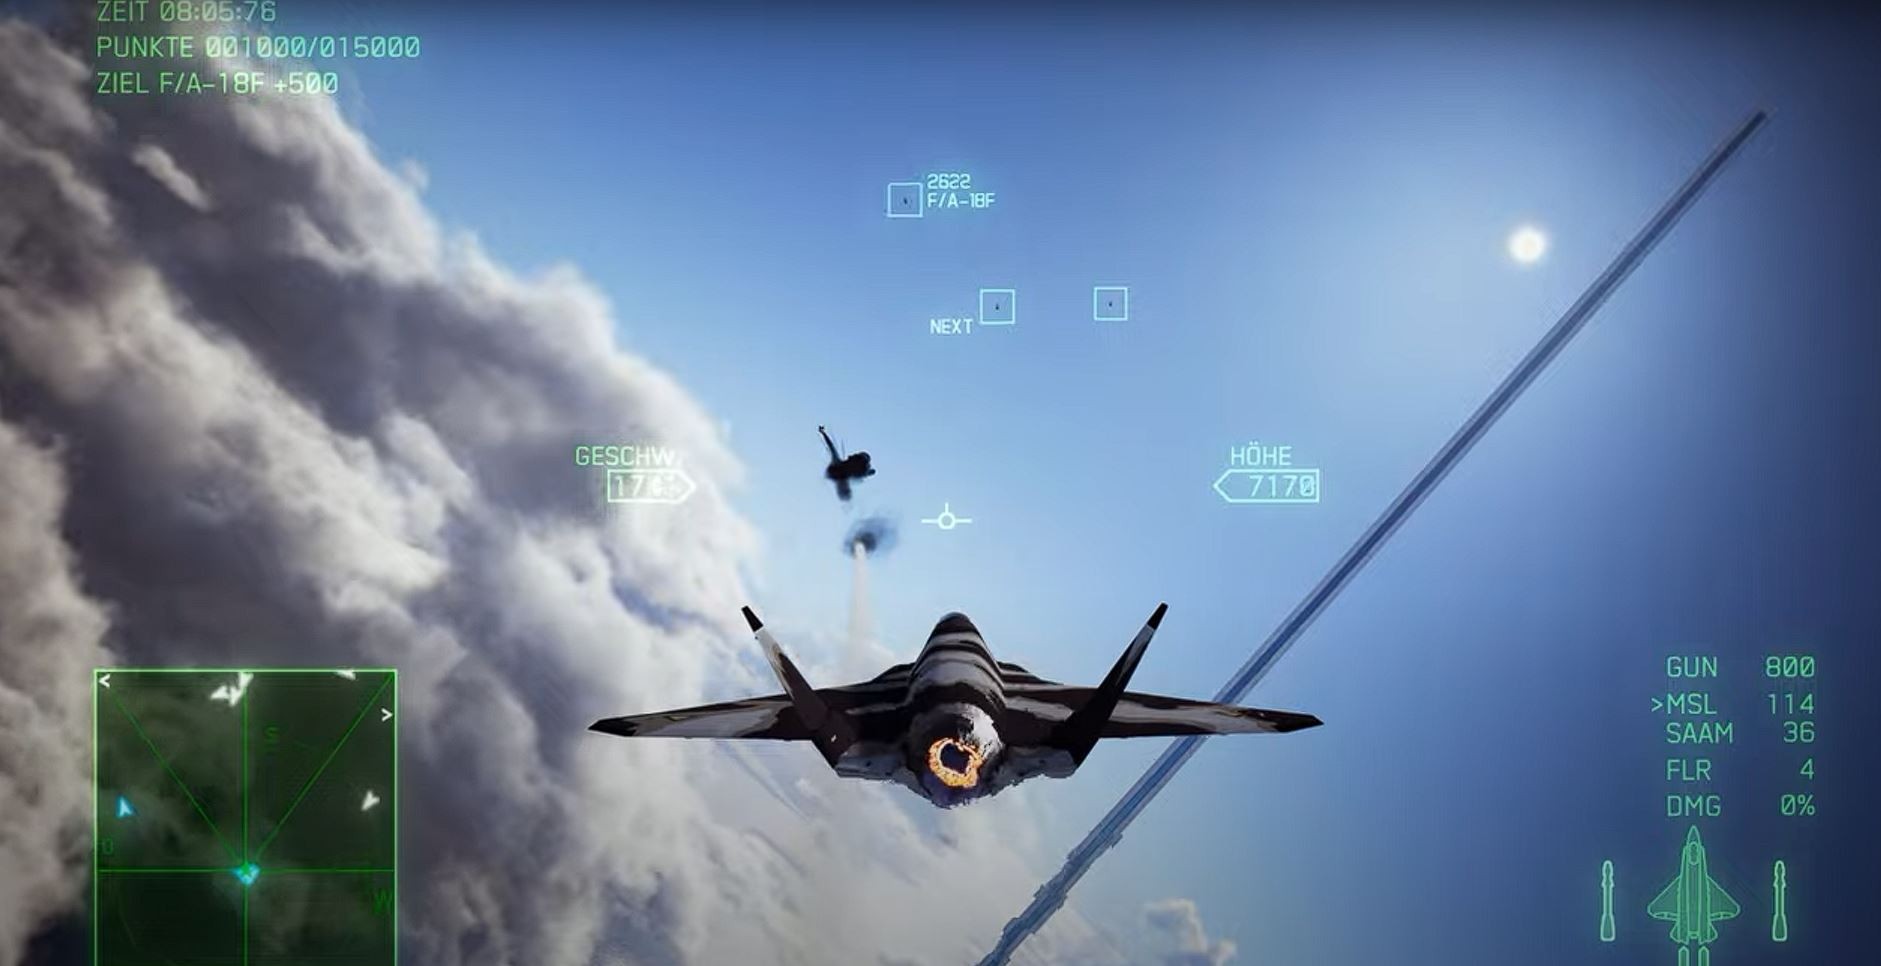 Ace Combat 7: Modders Add SU-75 Stealth Fighter to Campaign Before